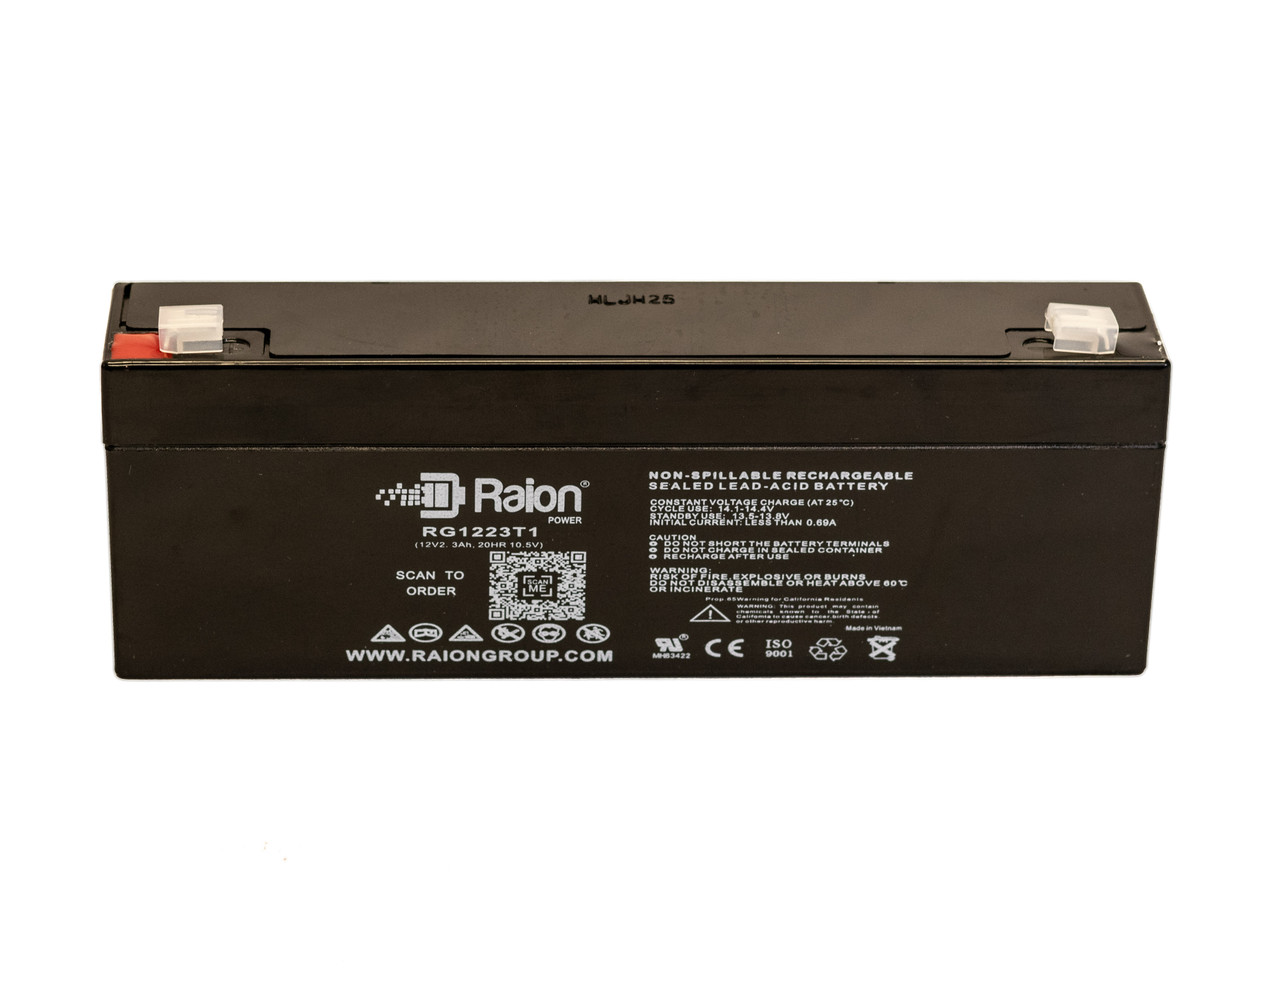 Raion Power 12V 2.3Ah SLA Battery With T1 Terminals For Baxter Healthcare AS5B Auto Syringe